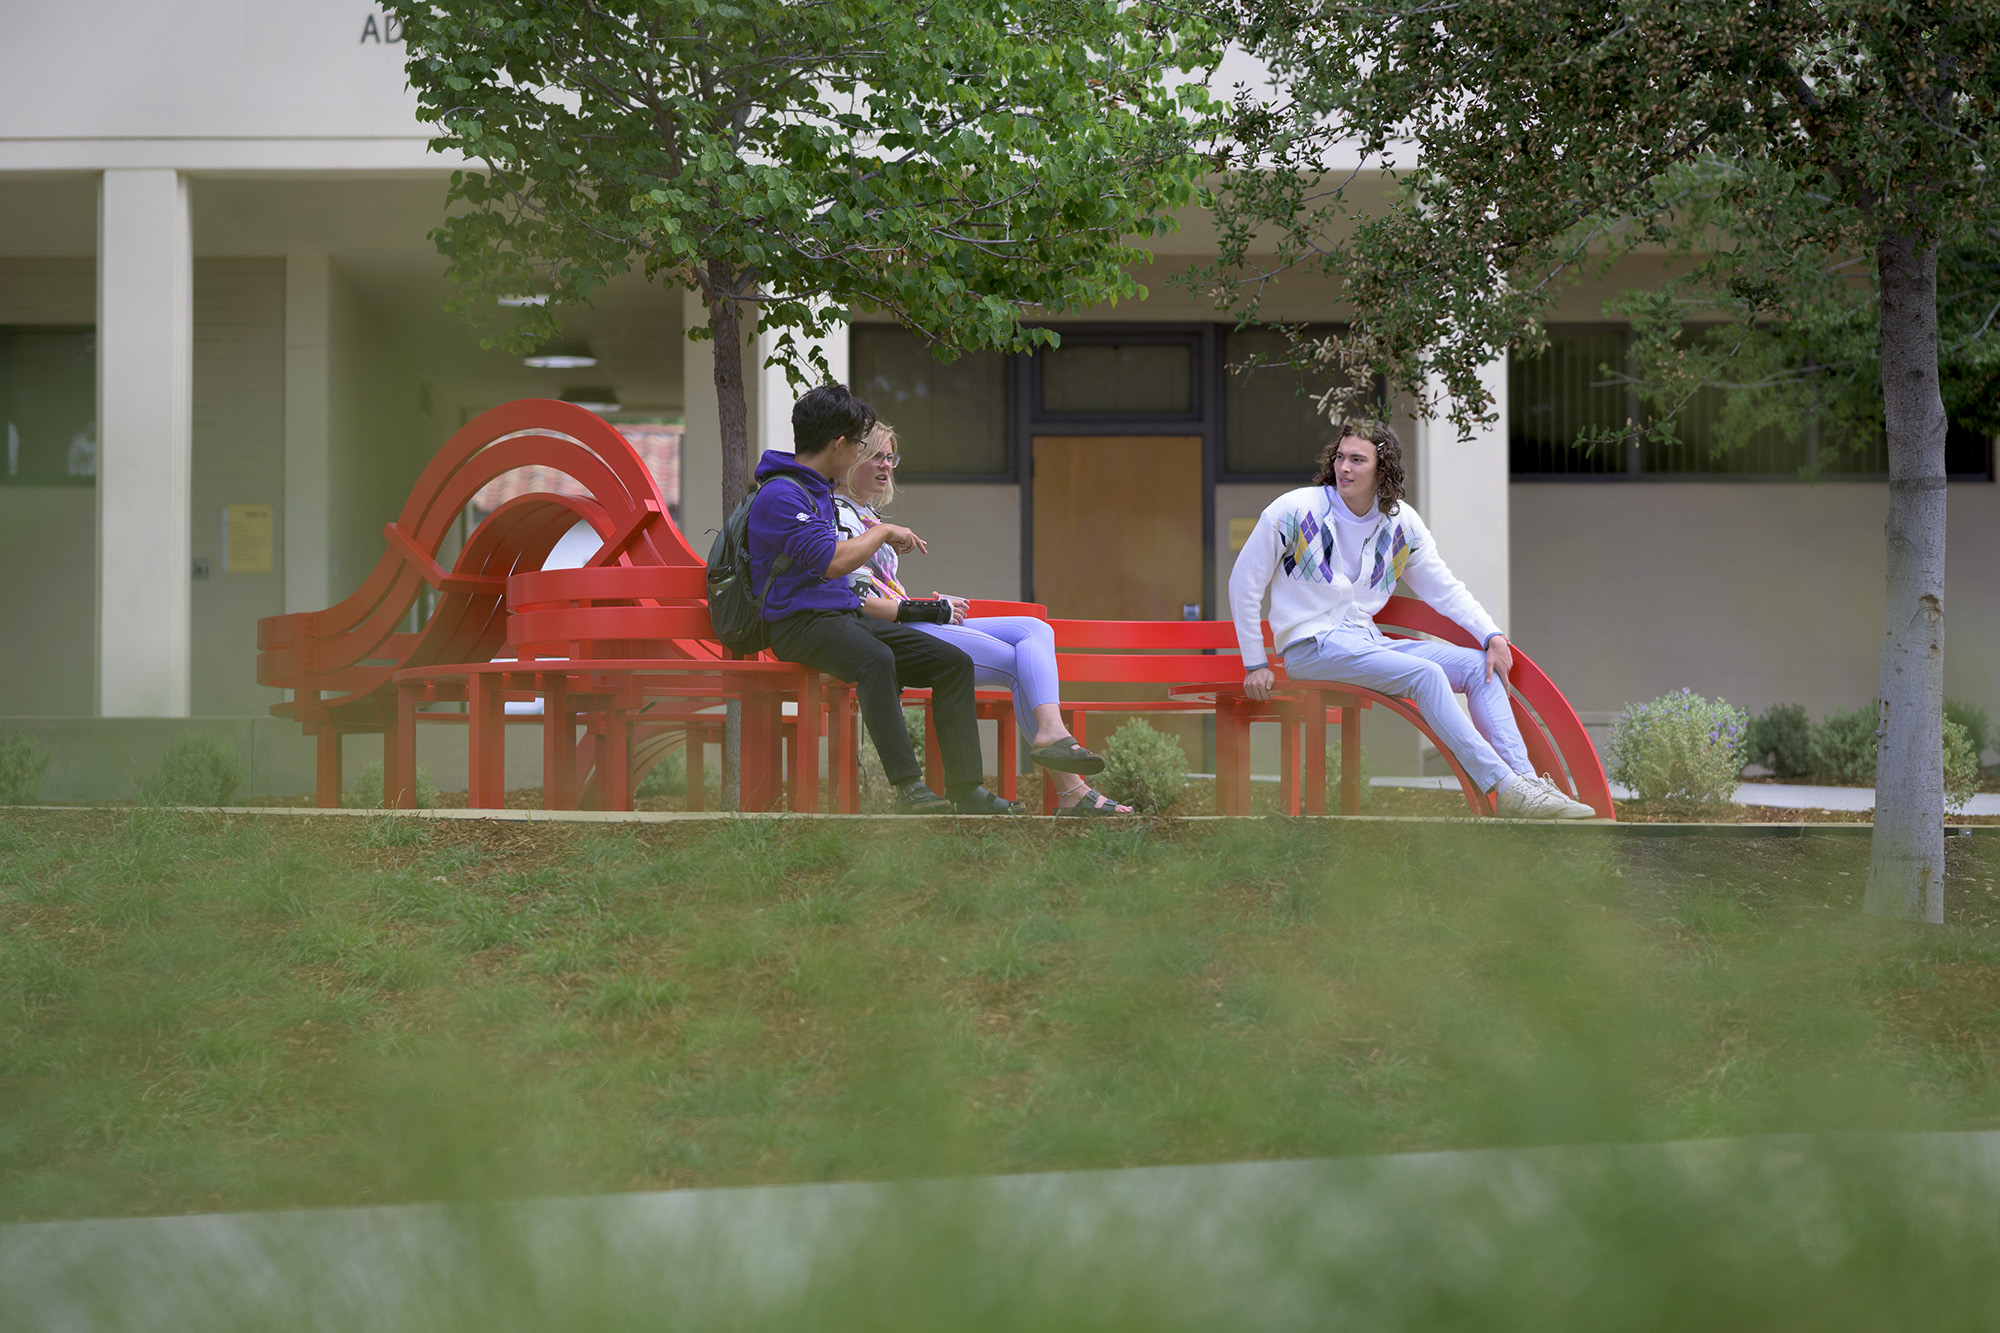 Students explore the brand new benches installed on campus together.